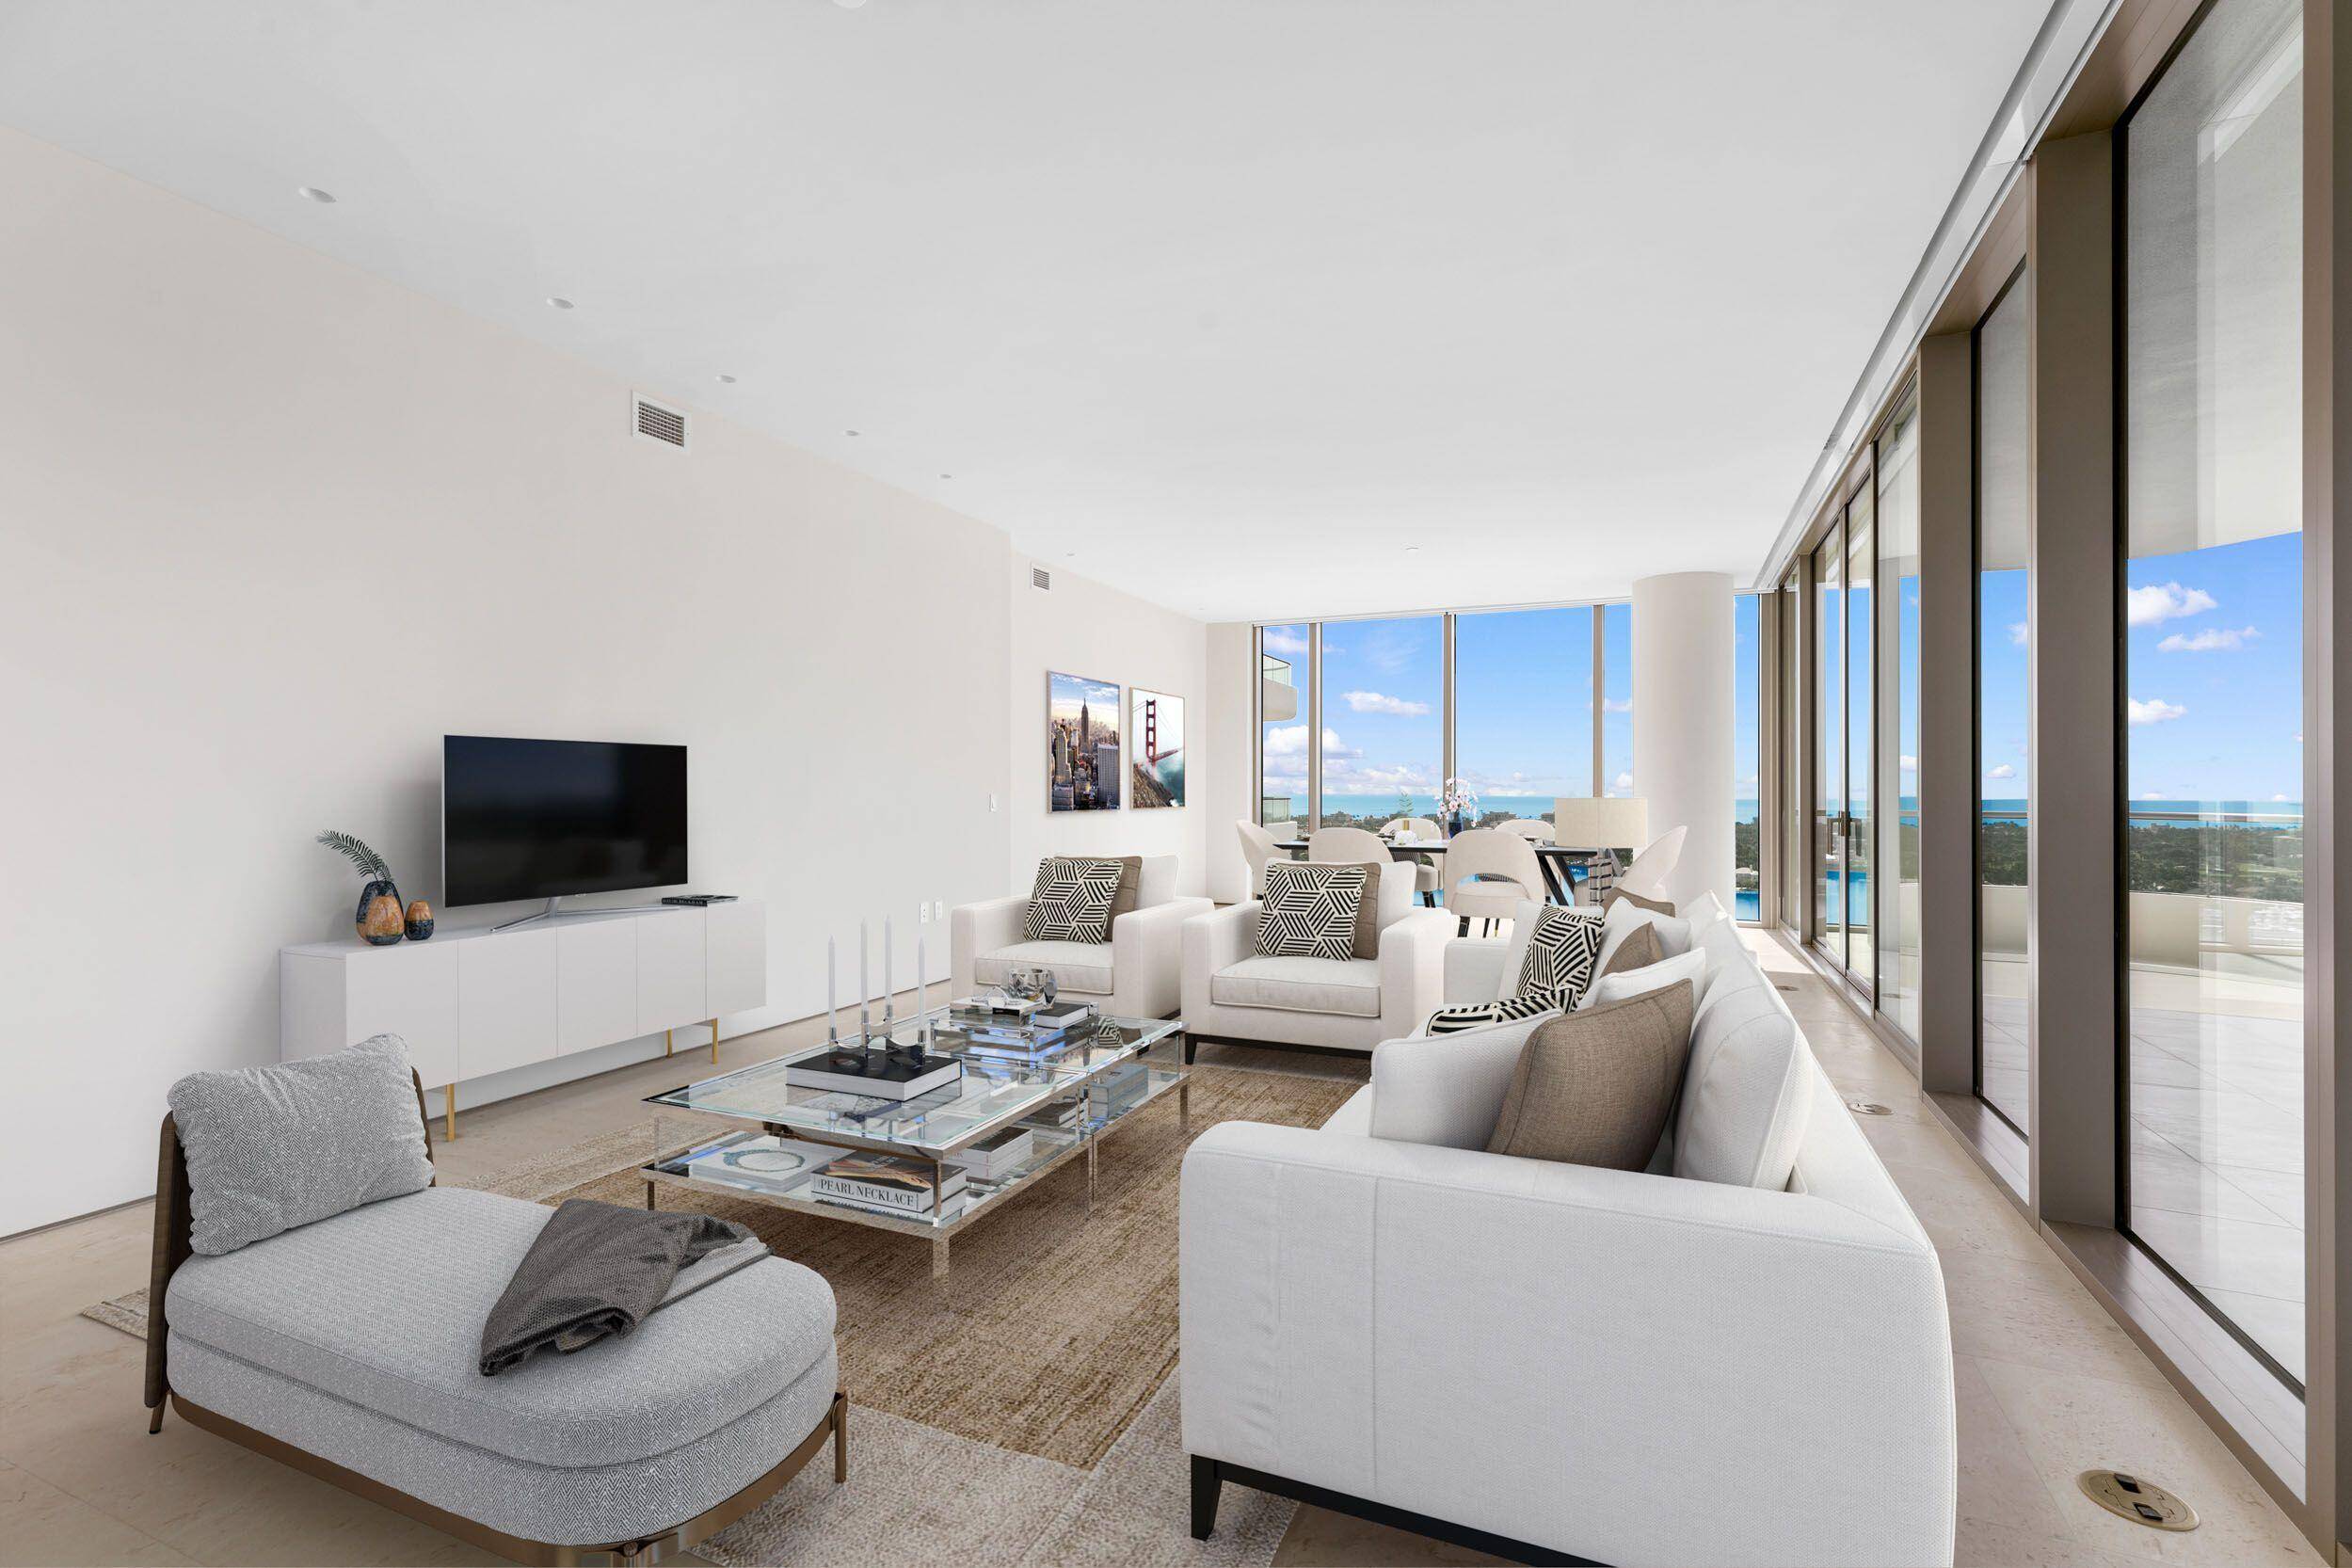 Step into this beautiful 2, 577 sqft, two bedroom plus den unit with sweeping views of the Intracoastal, Palm Beach Island and the ocean.